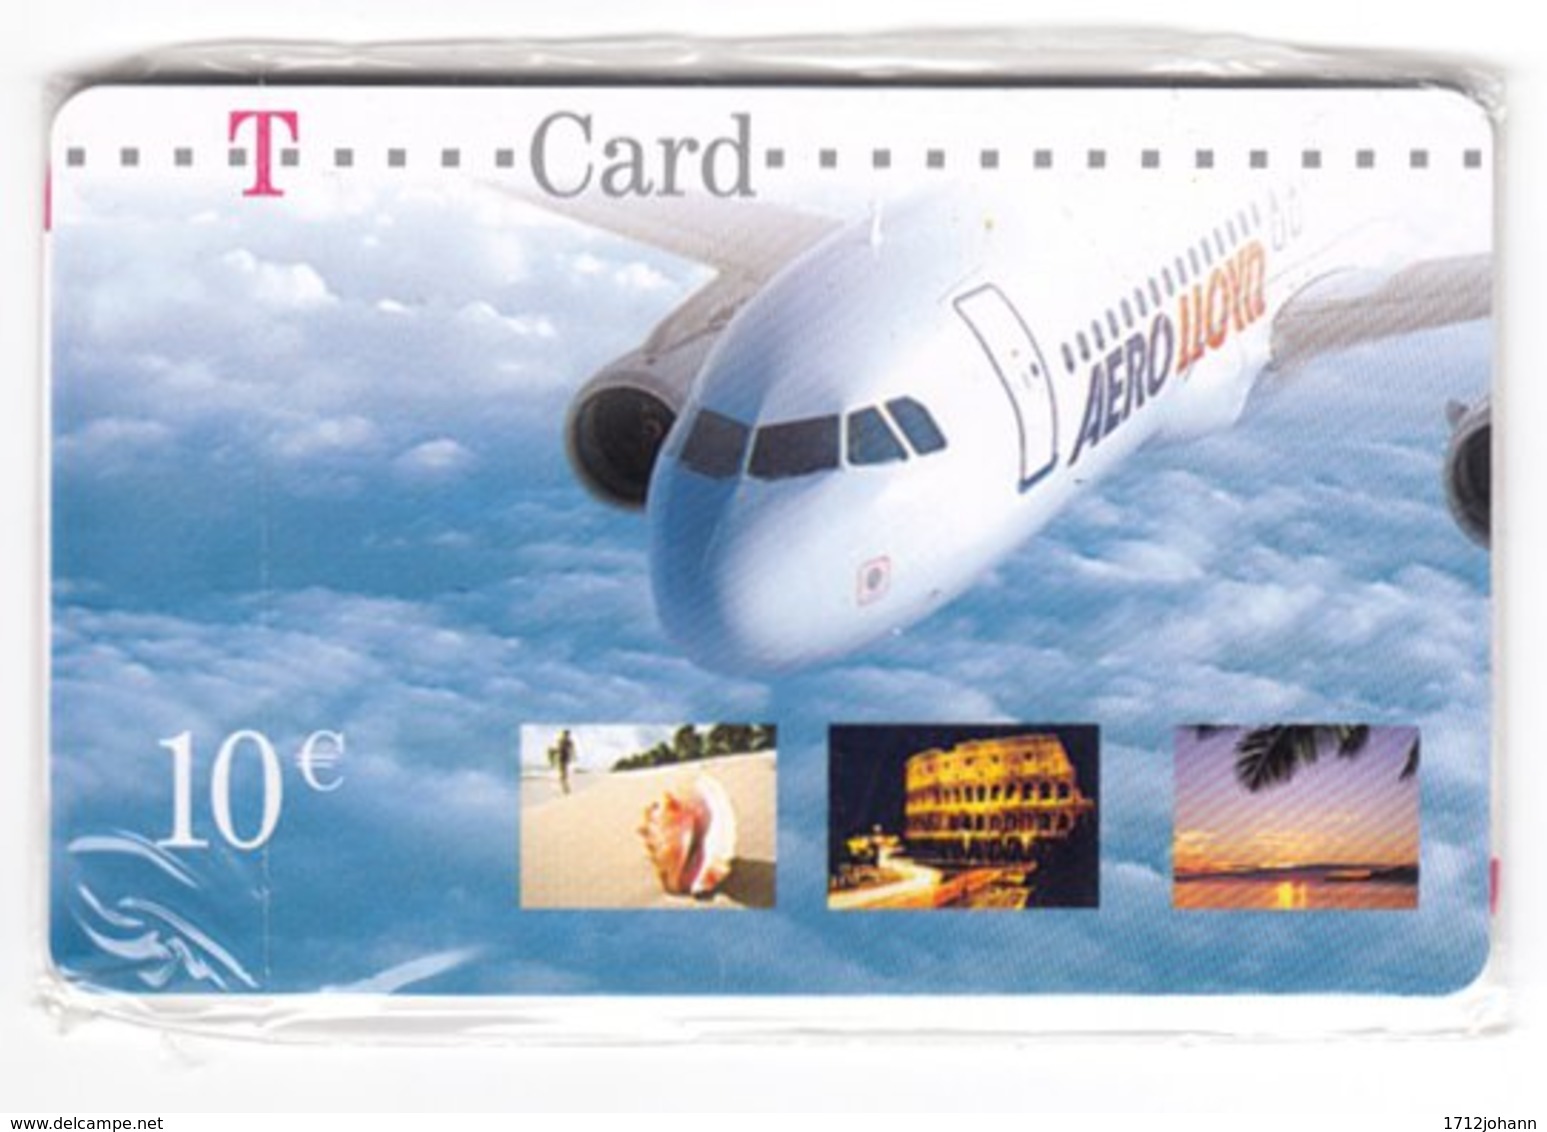 GERMANY Prepaid B-562 - T-Card - Traffic, Airplane - In Blister - GSM, Cartes Prepayées & Recharges